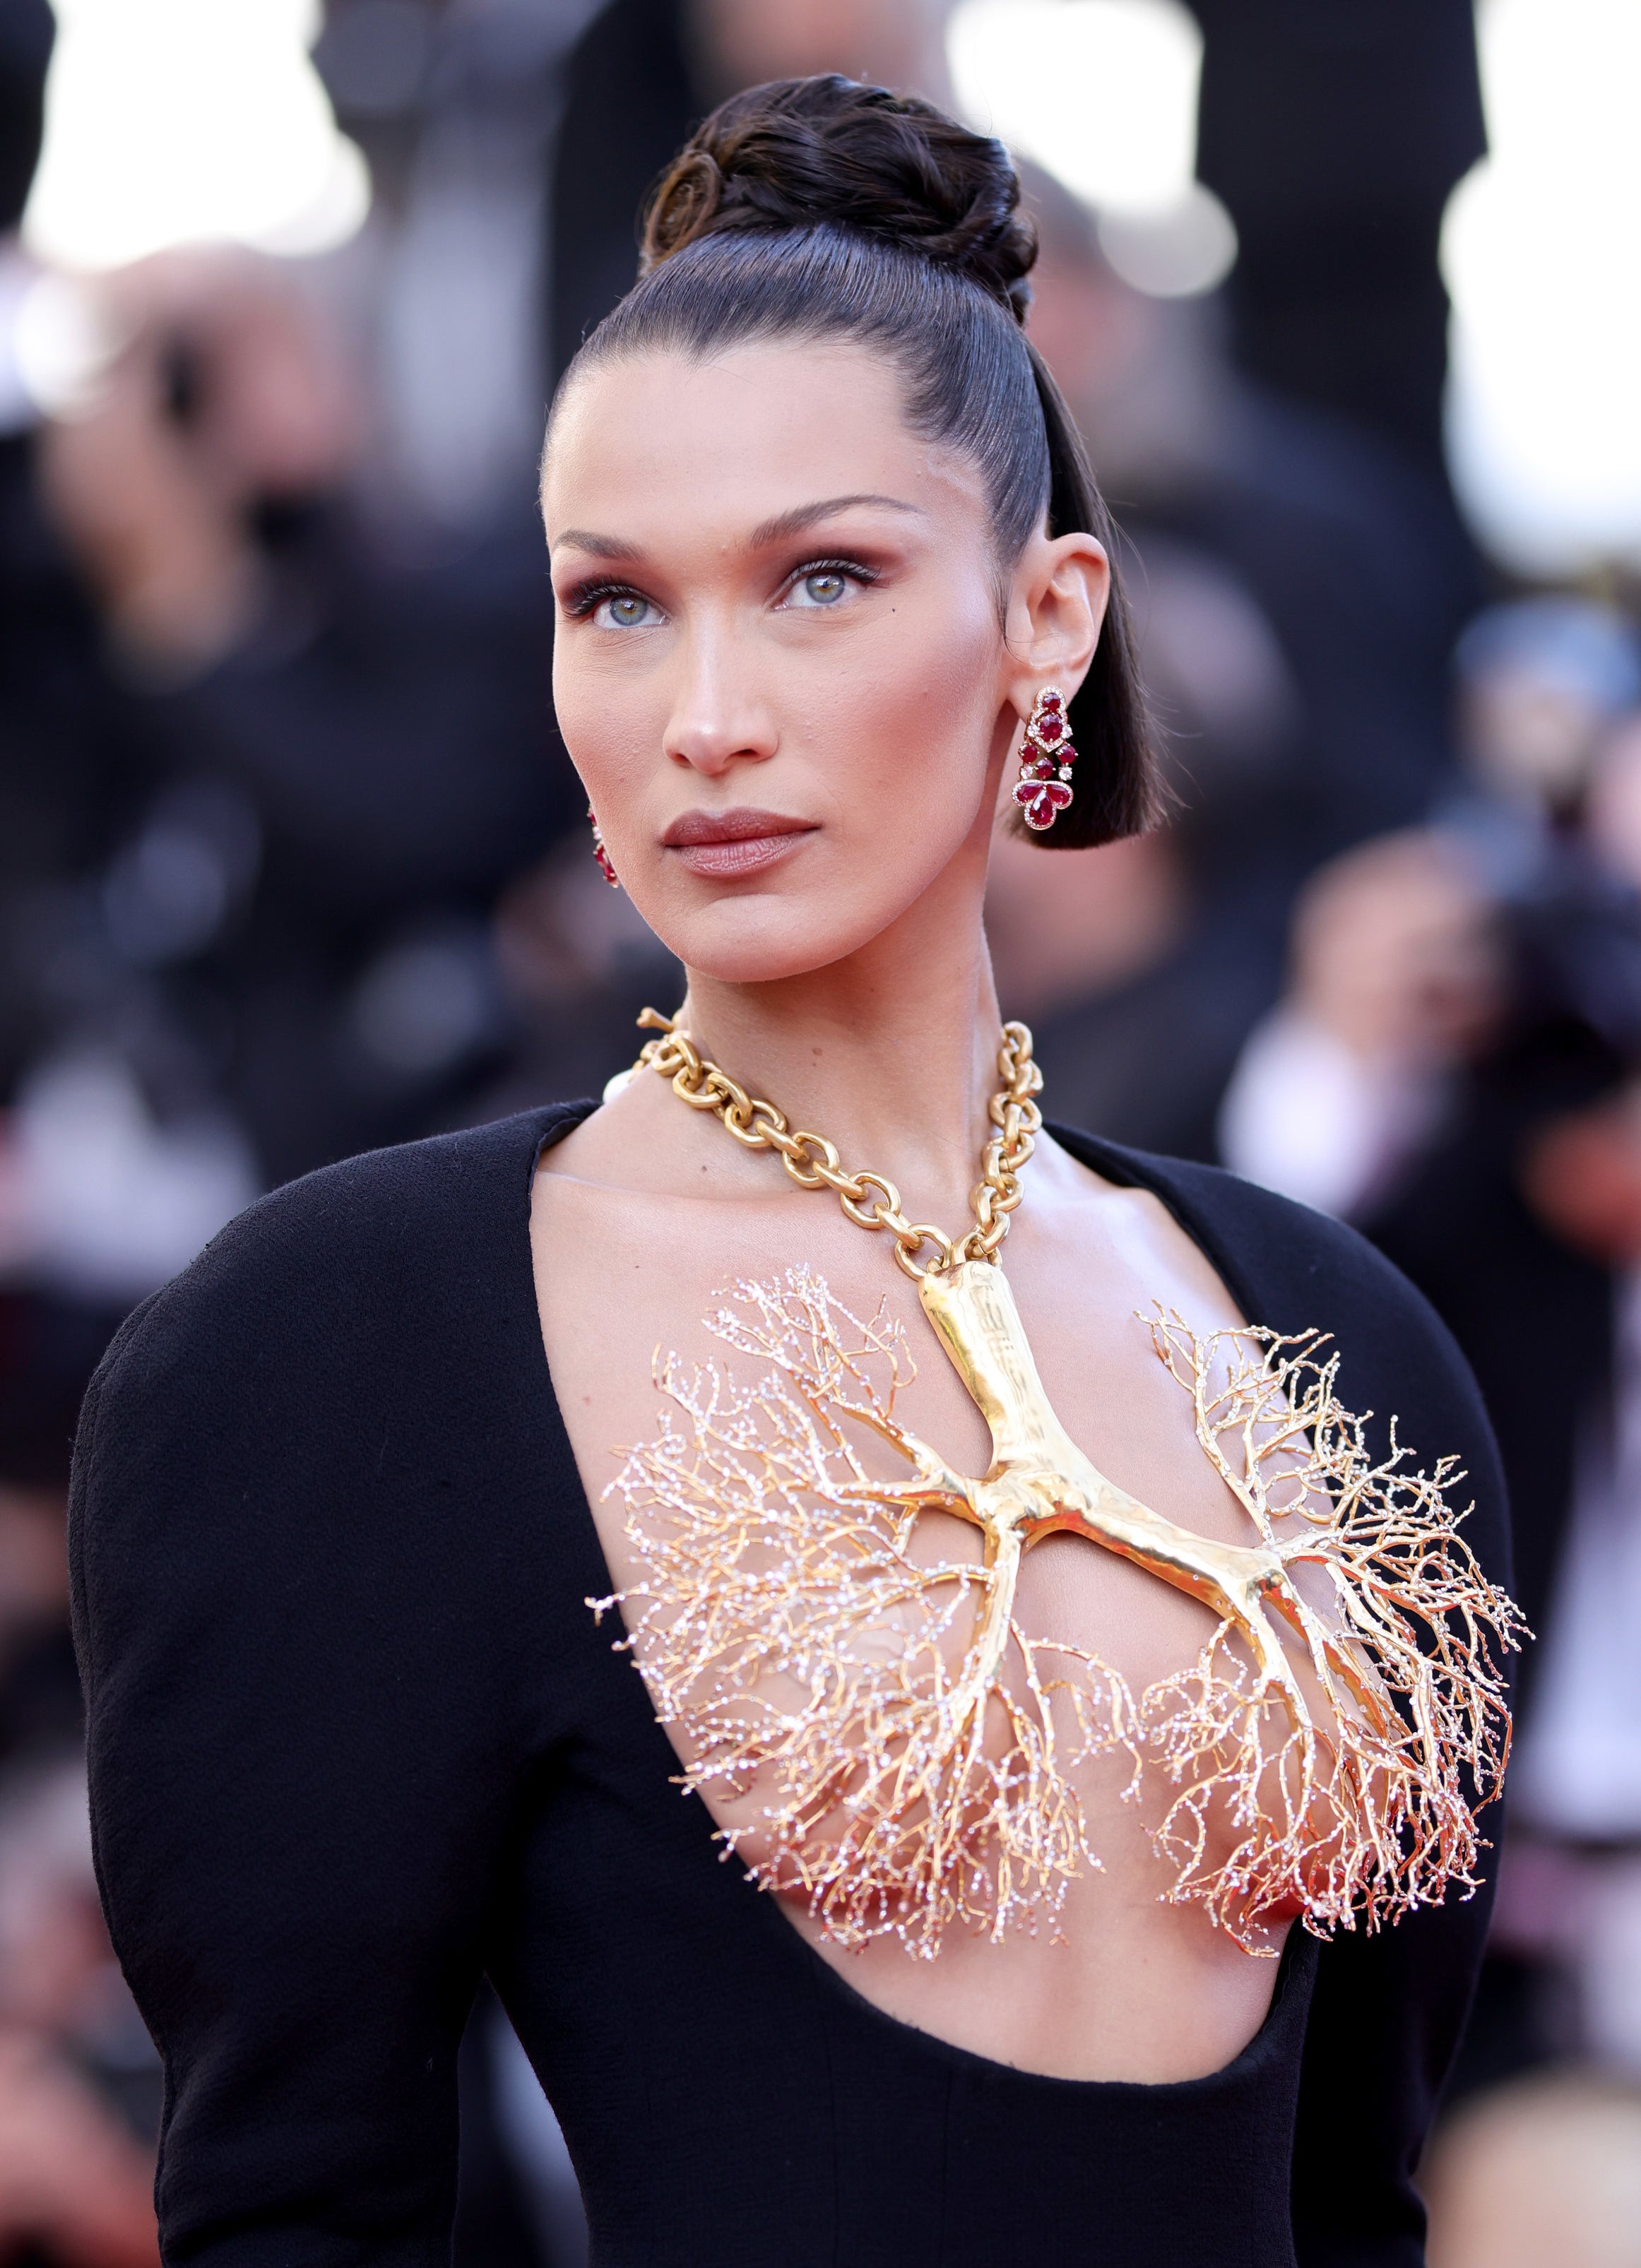 Bella Hadid attends the &quot;Tre Piani (Three Floors)&quot; screening during the 74th annual Cannes Film Festival